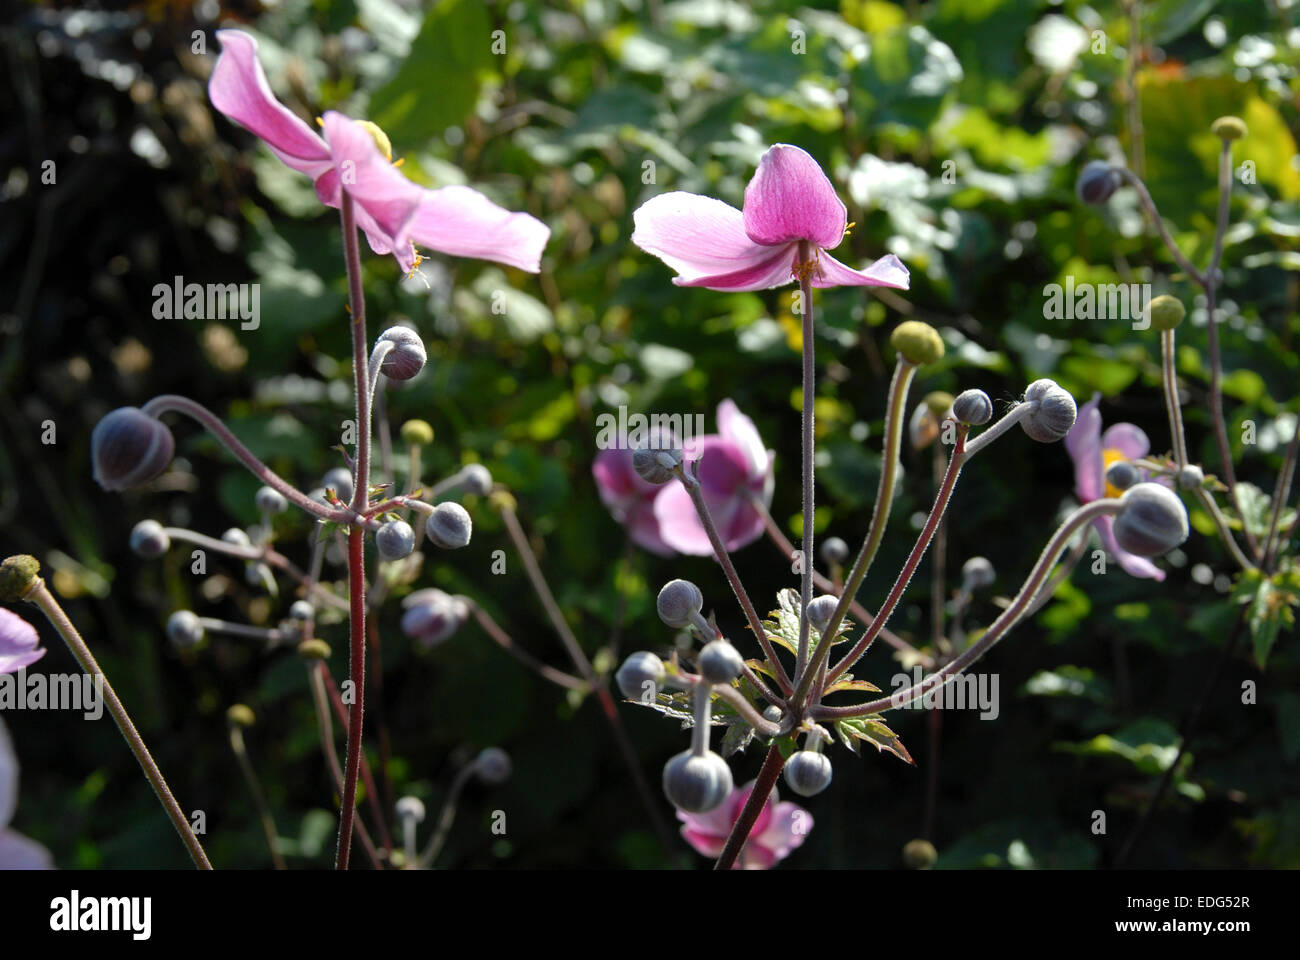 Japanese Anemone,  Anemone x hybrida.  Close up showing pink or mauve flowers and buds. Stock Photo